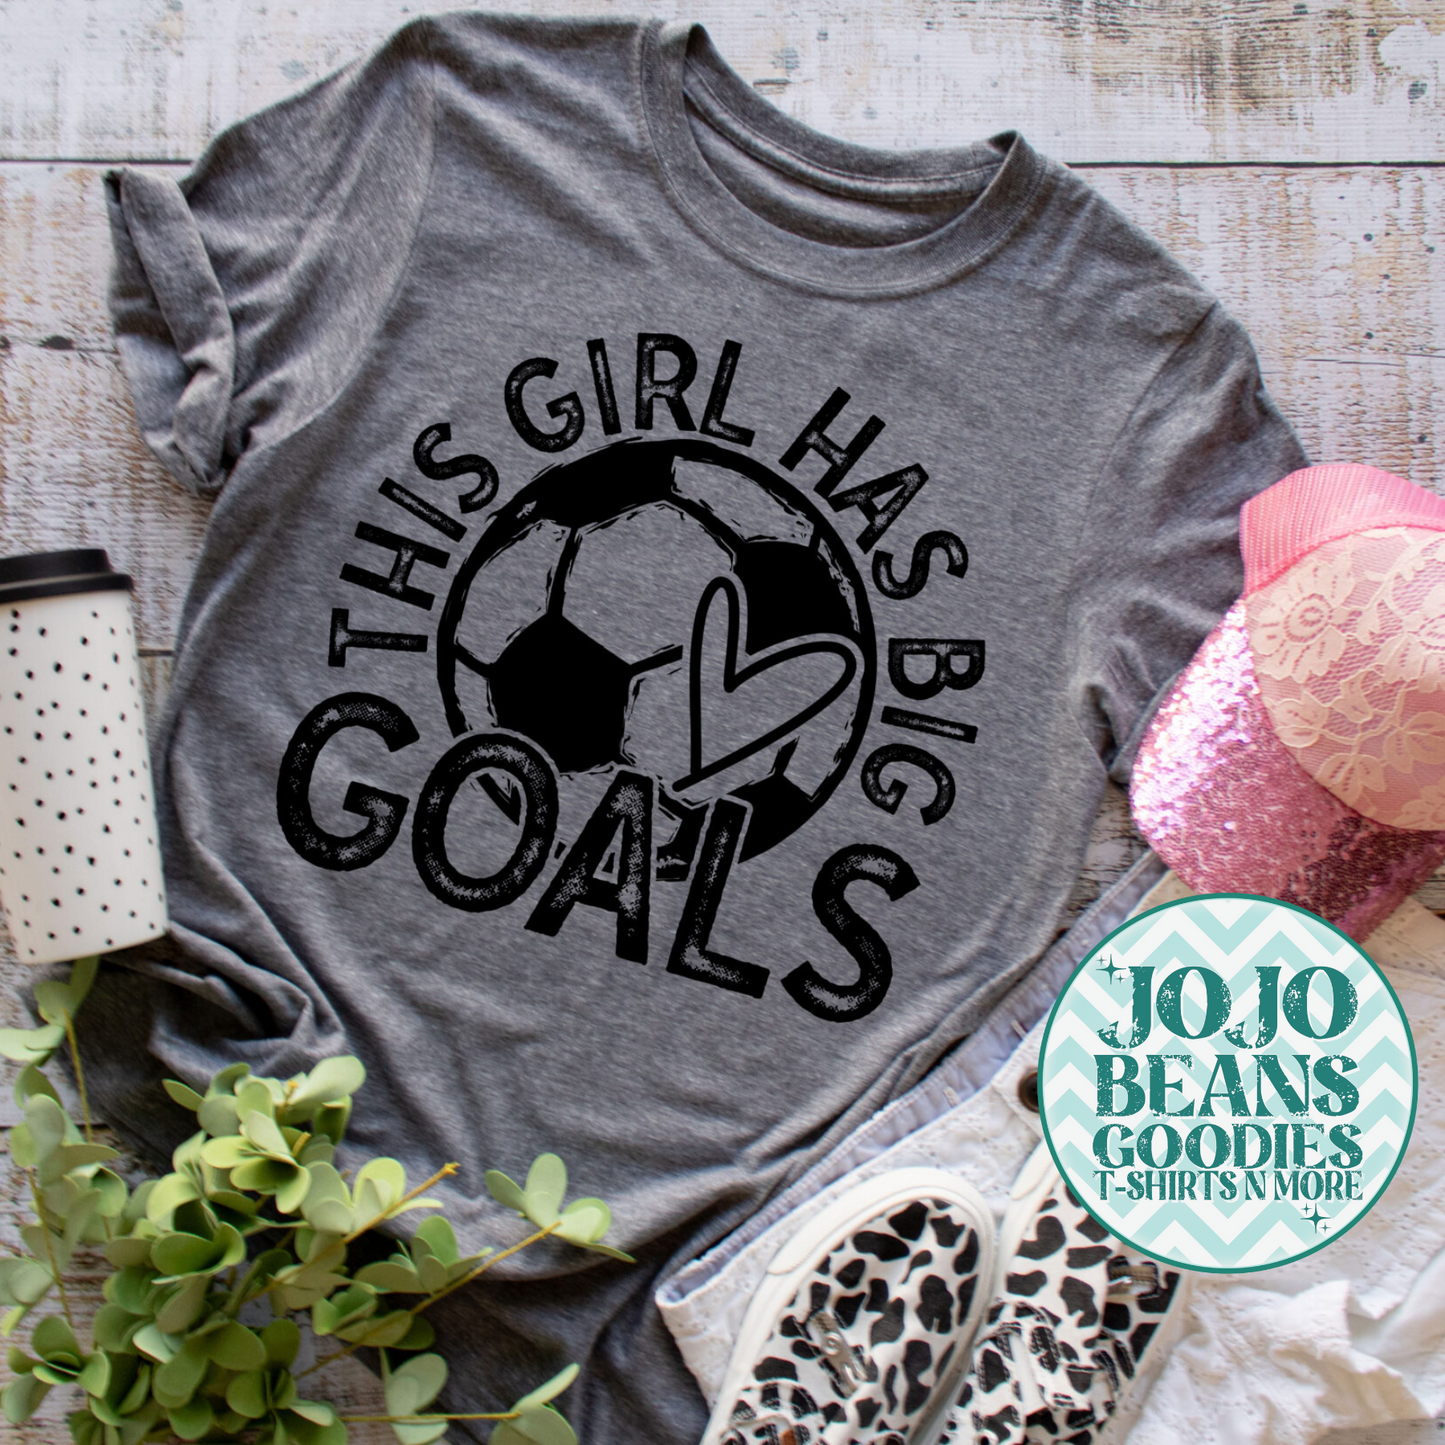 This Girl Has Big Goals - Soccer